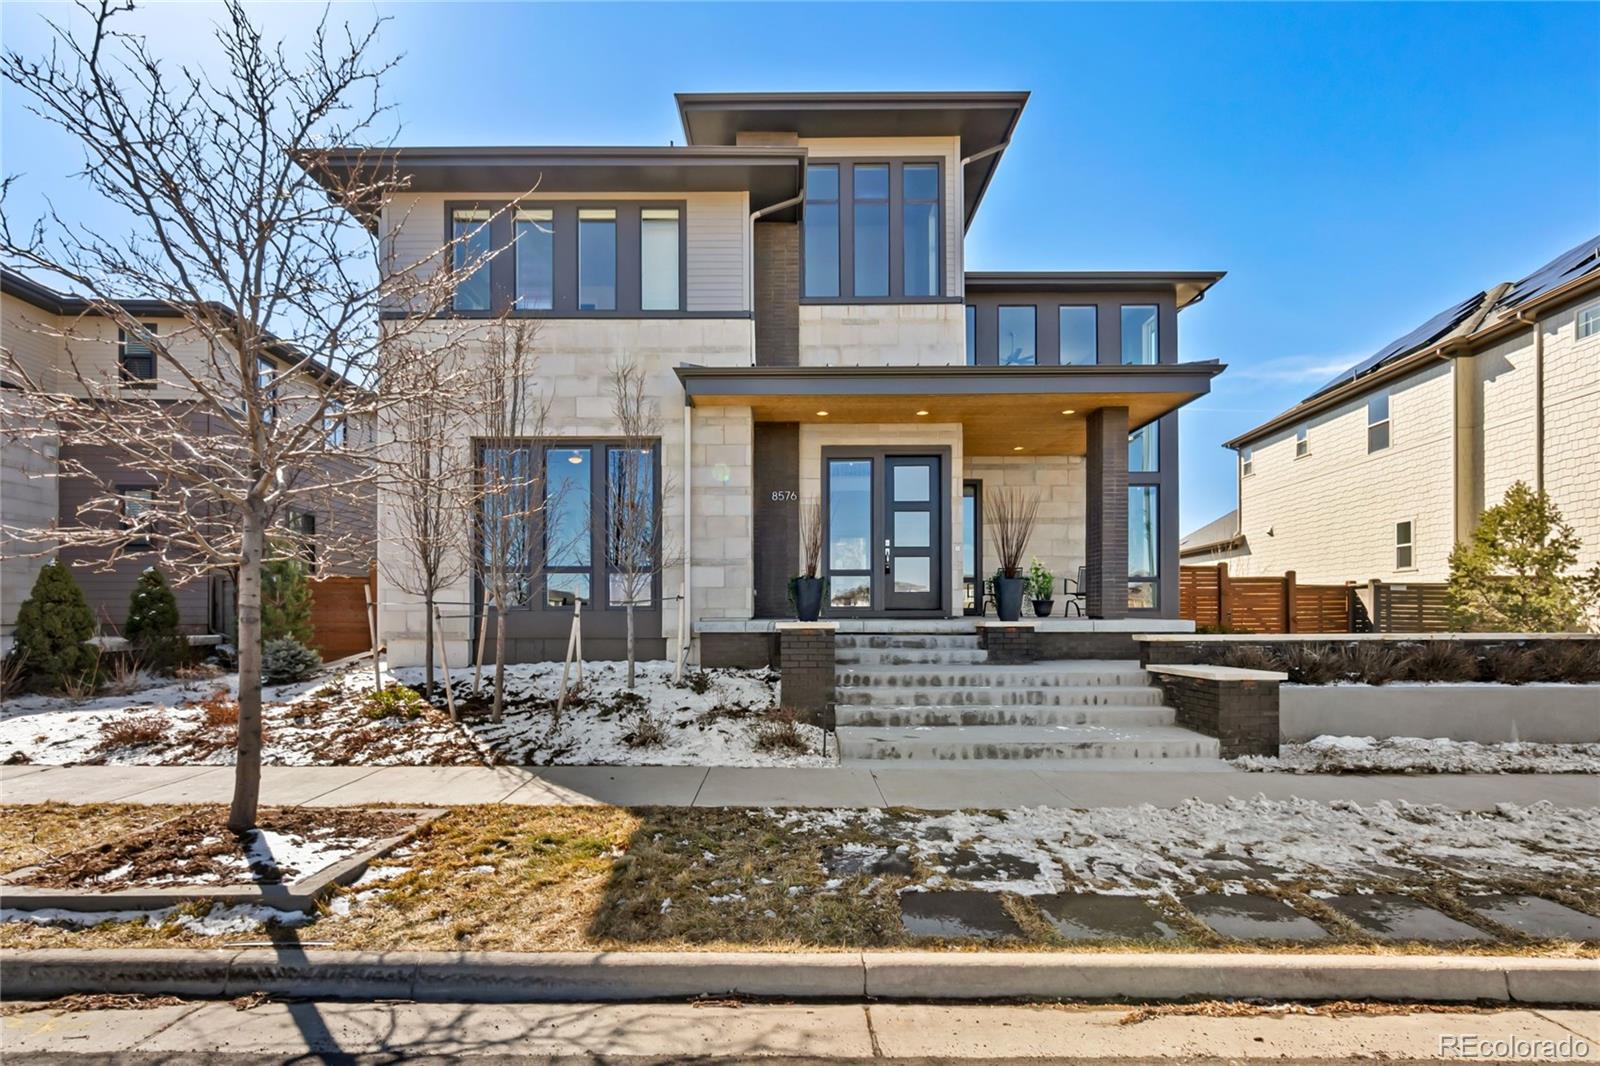 8576 e 51st avenue, Denver sold home. Closed on 2024-04-12 for $1,530,000.